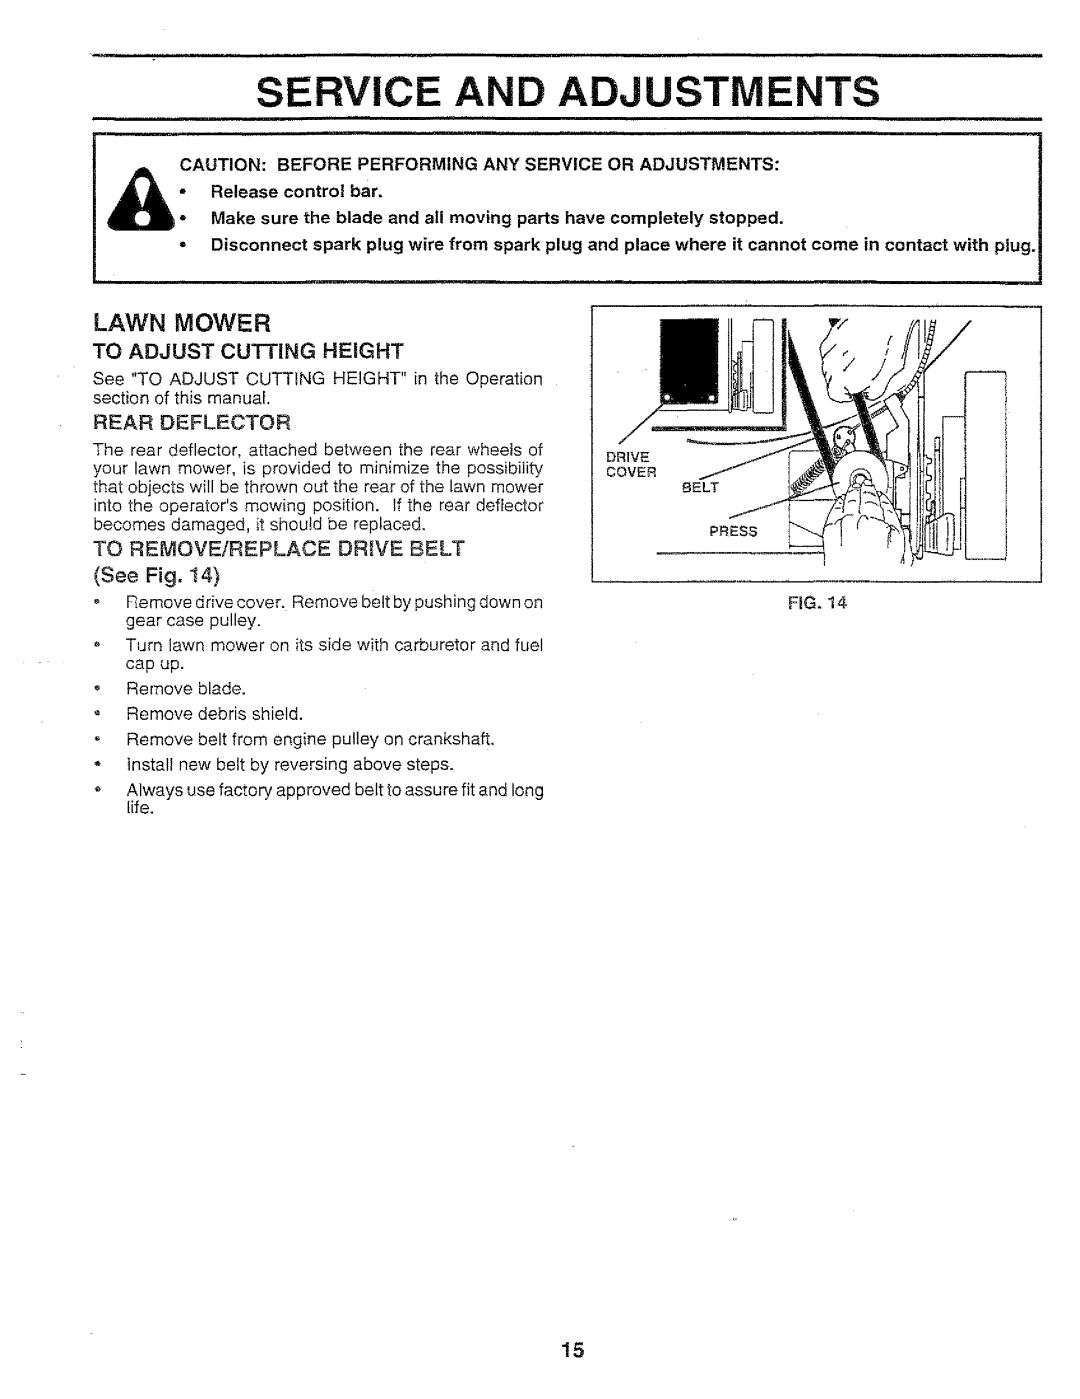 Sears 917.37283 manual Service And Adjustments, Lawn Mower, To Adjust Cutting Height, Rear Deflector 